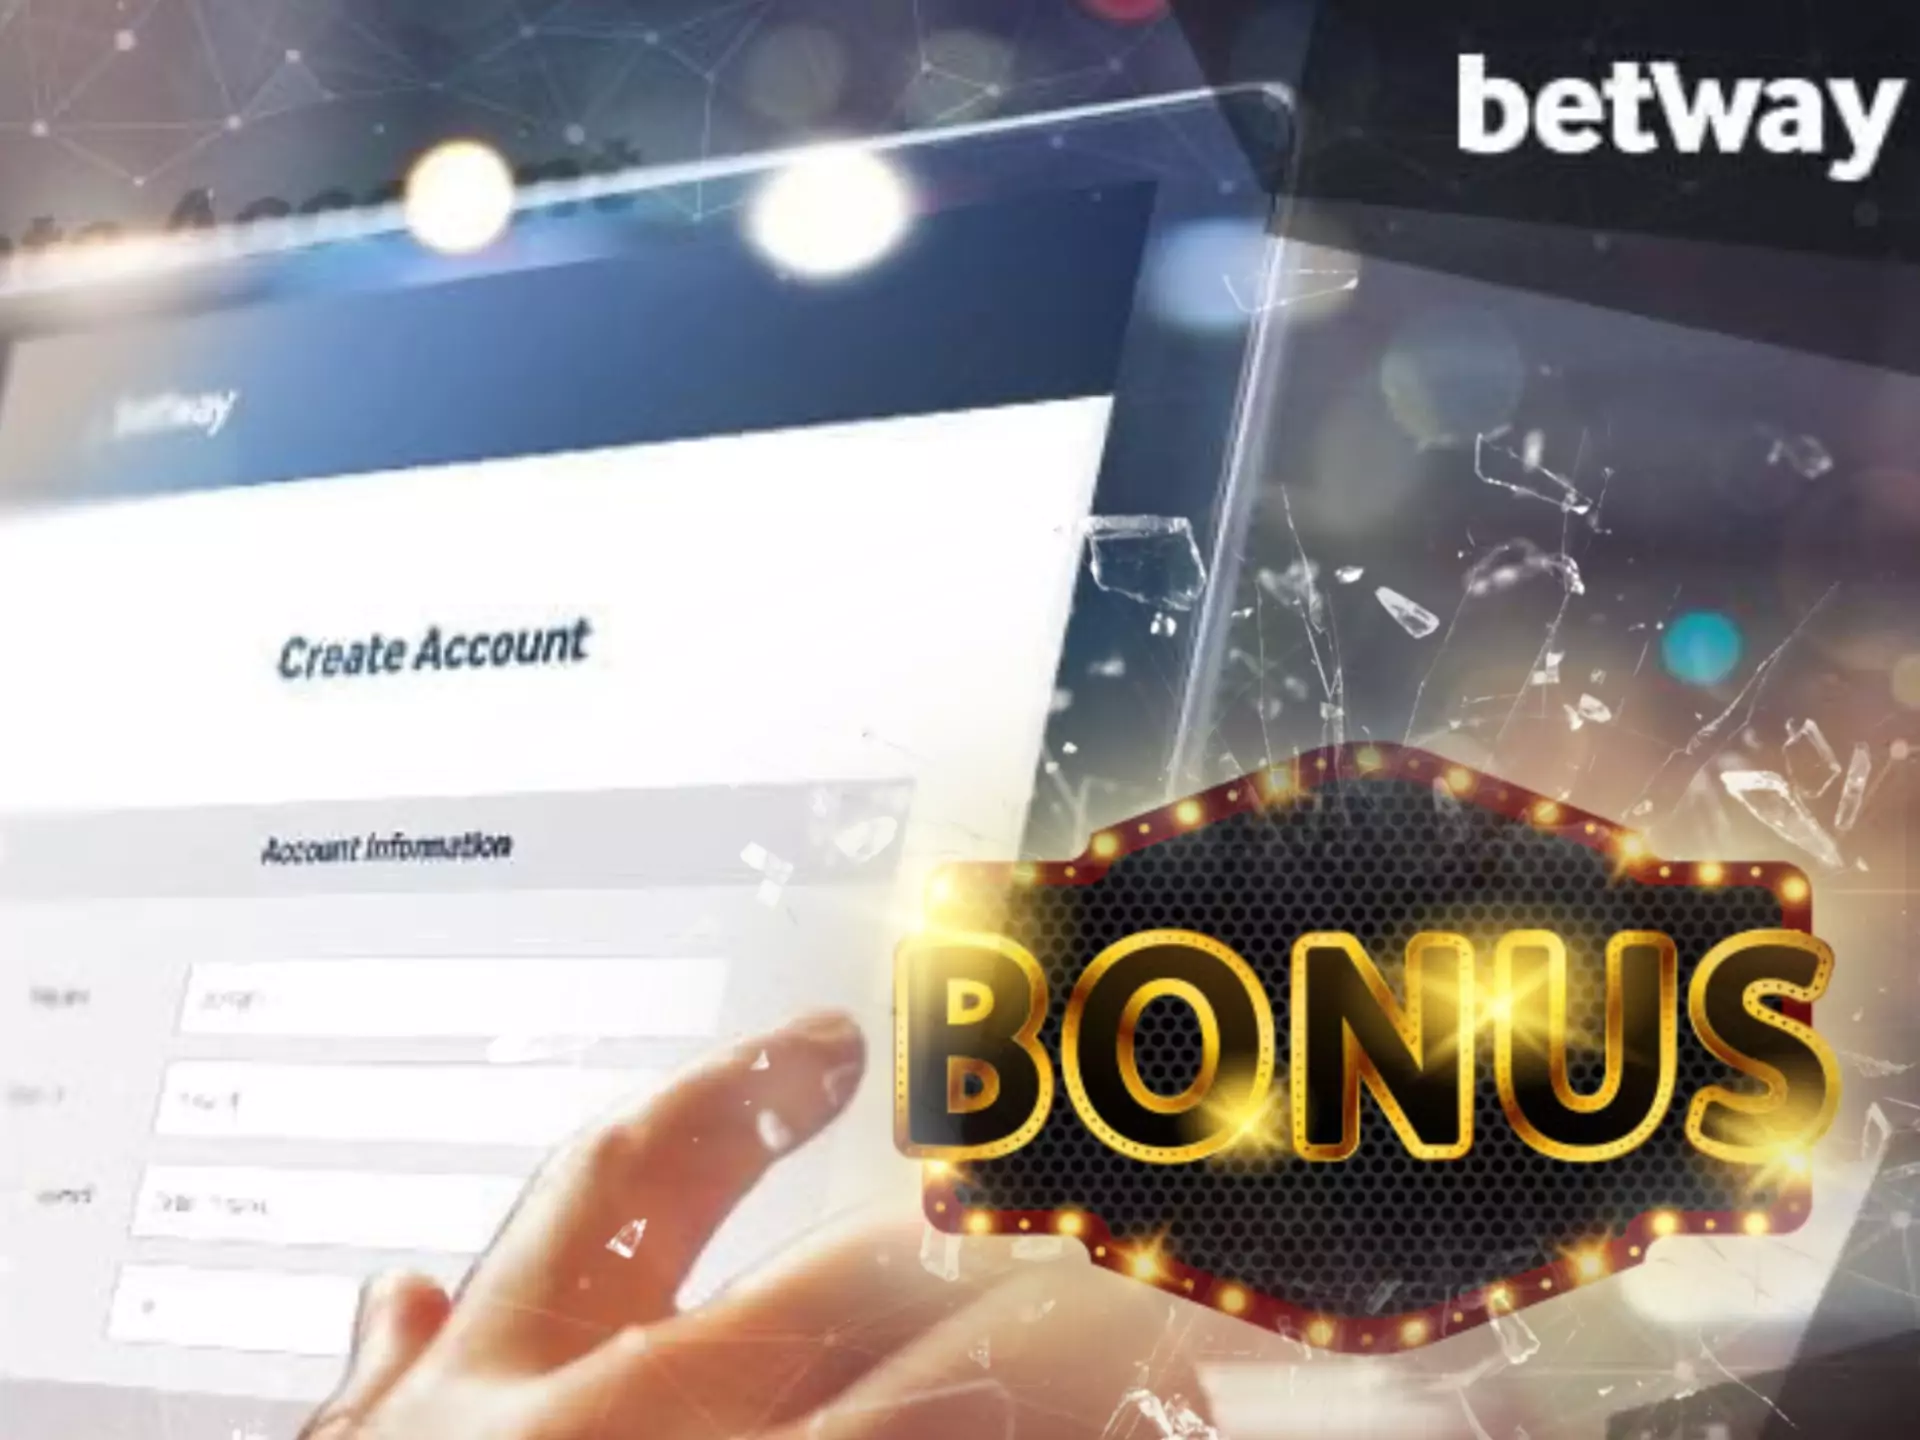 Register at Betway via the mobile app and get attractive bonuses.